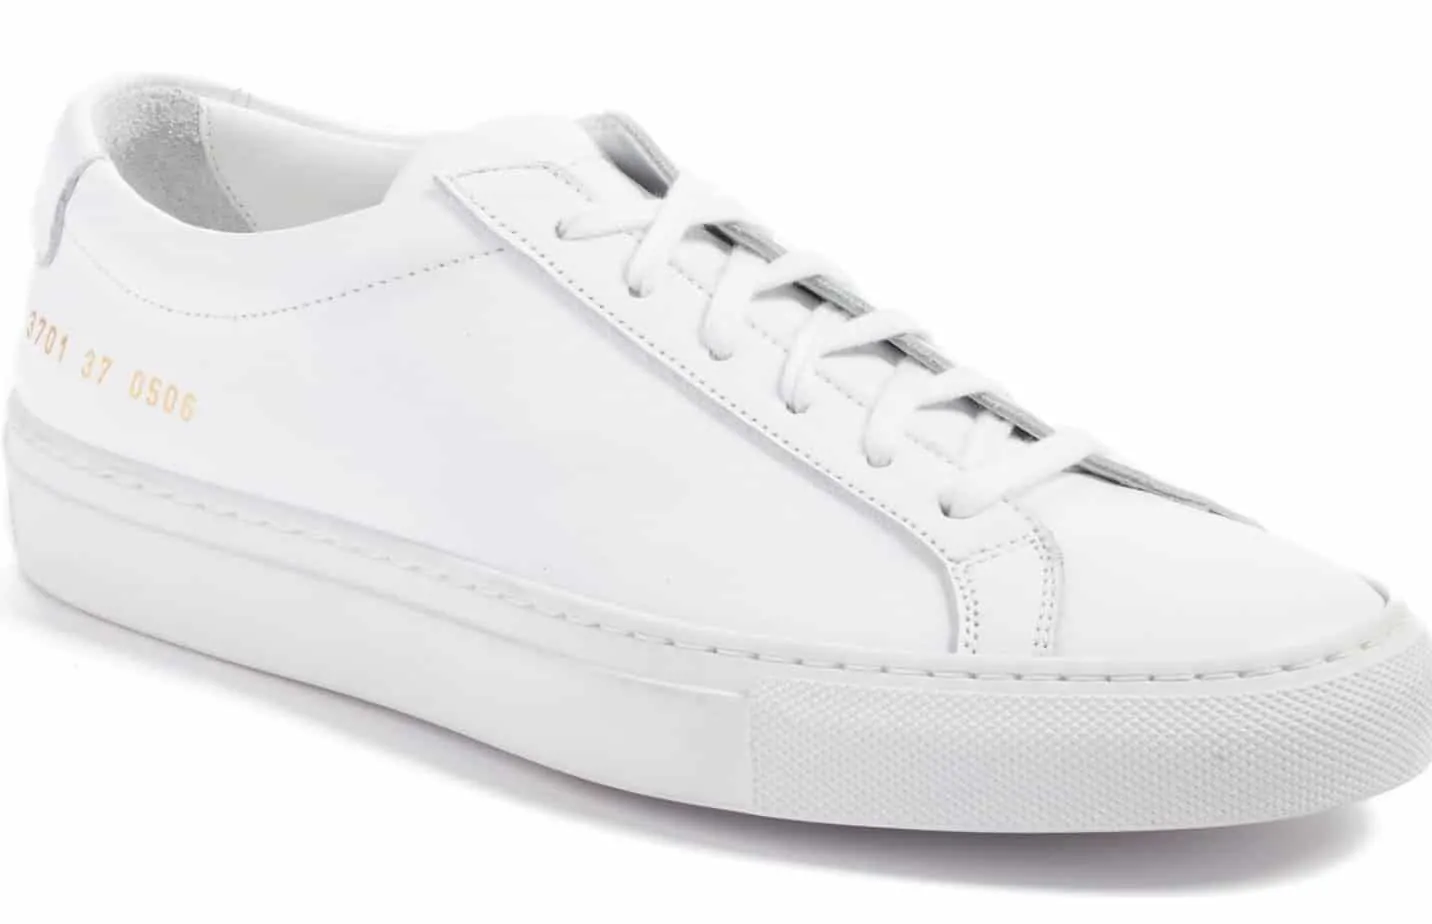 Common Projects Sneaker